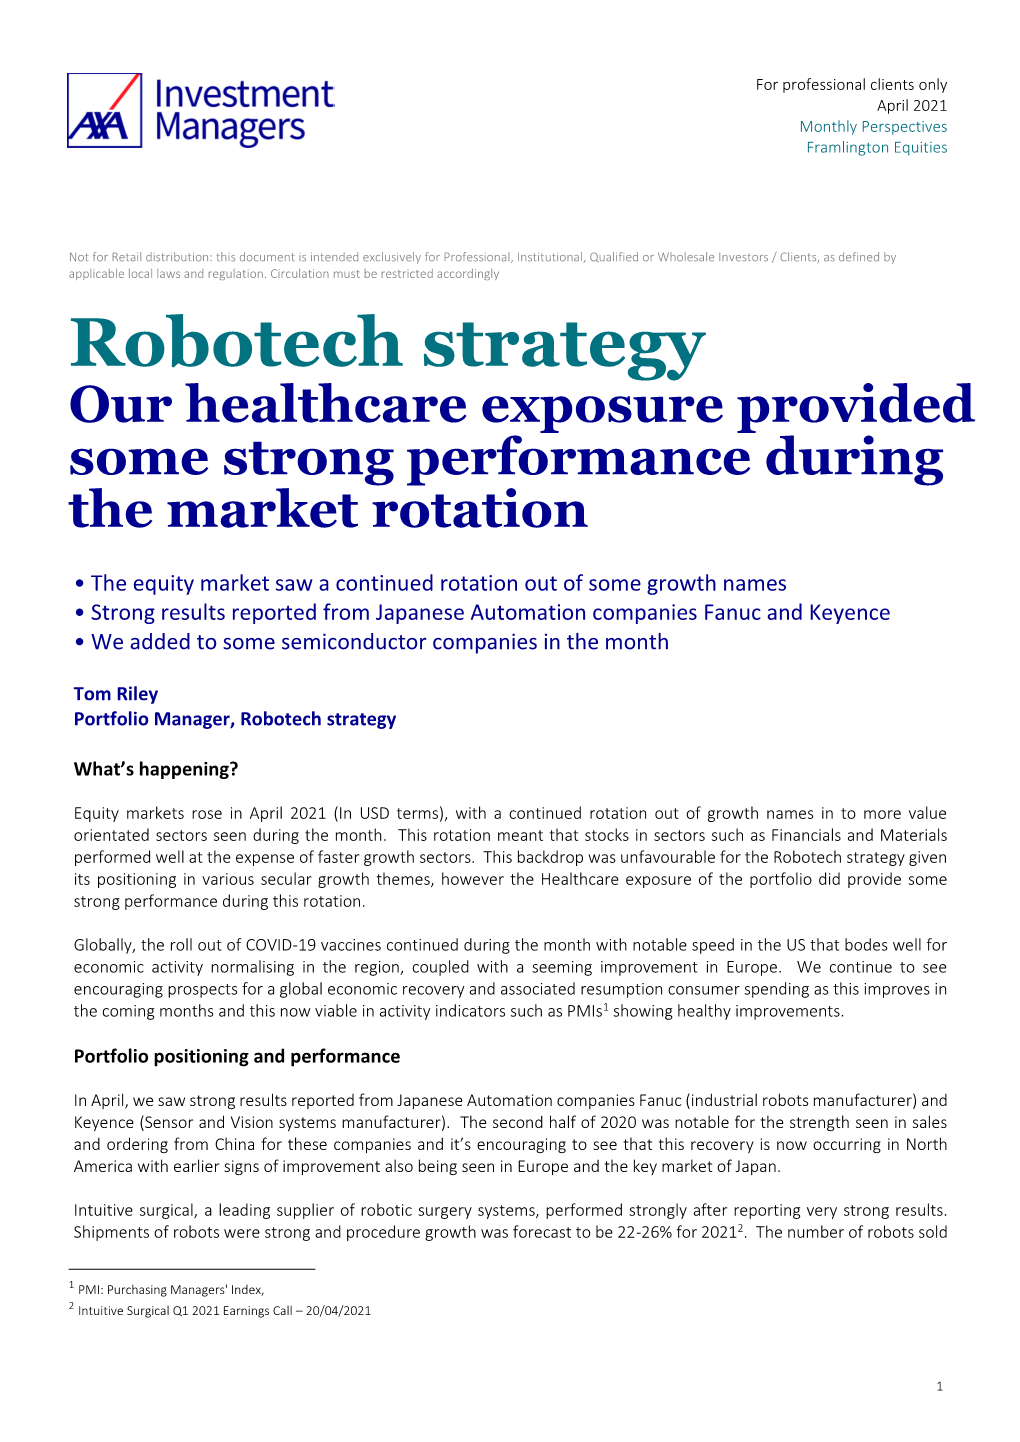 Robotech Strategy Our Healthcare Exposure Provided Some Strong Performance During the Market Rotation